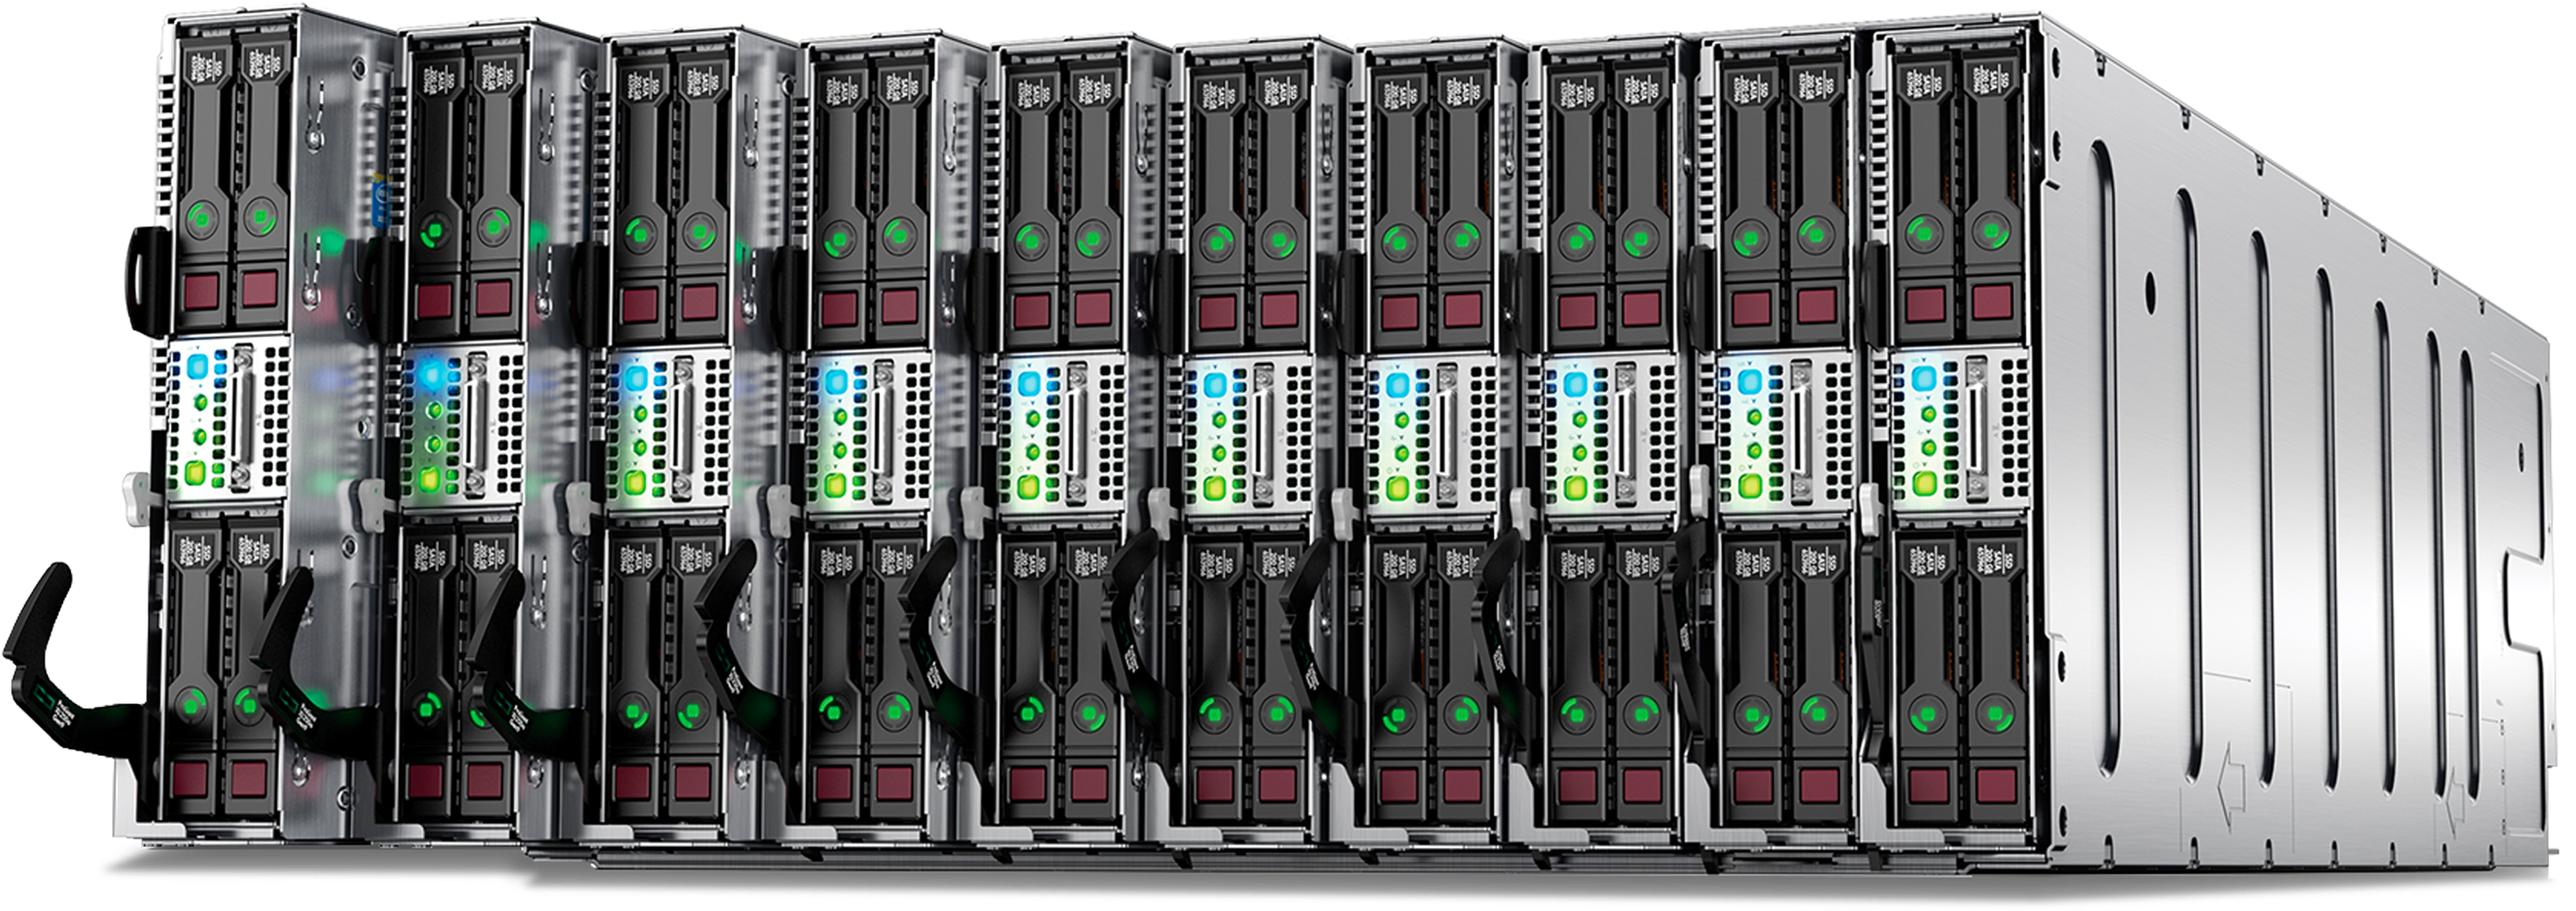 Server Png - Hpe Apollo 6000 Gen10 (5096x2000), Png Download